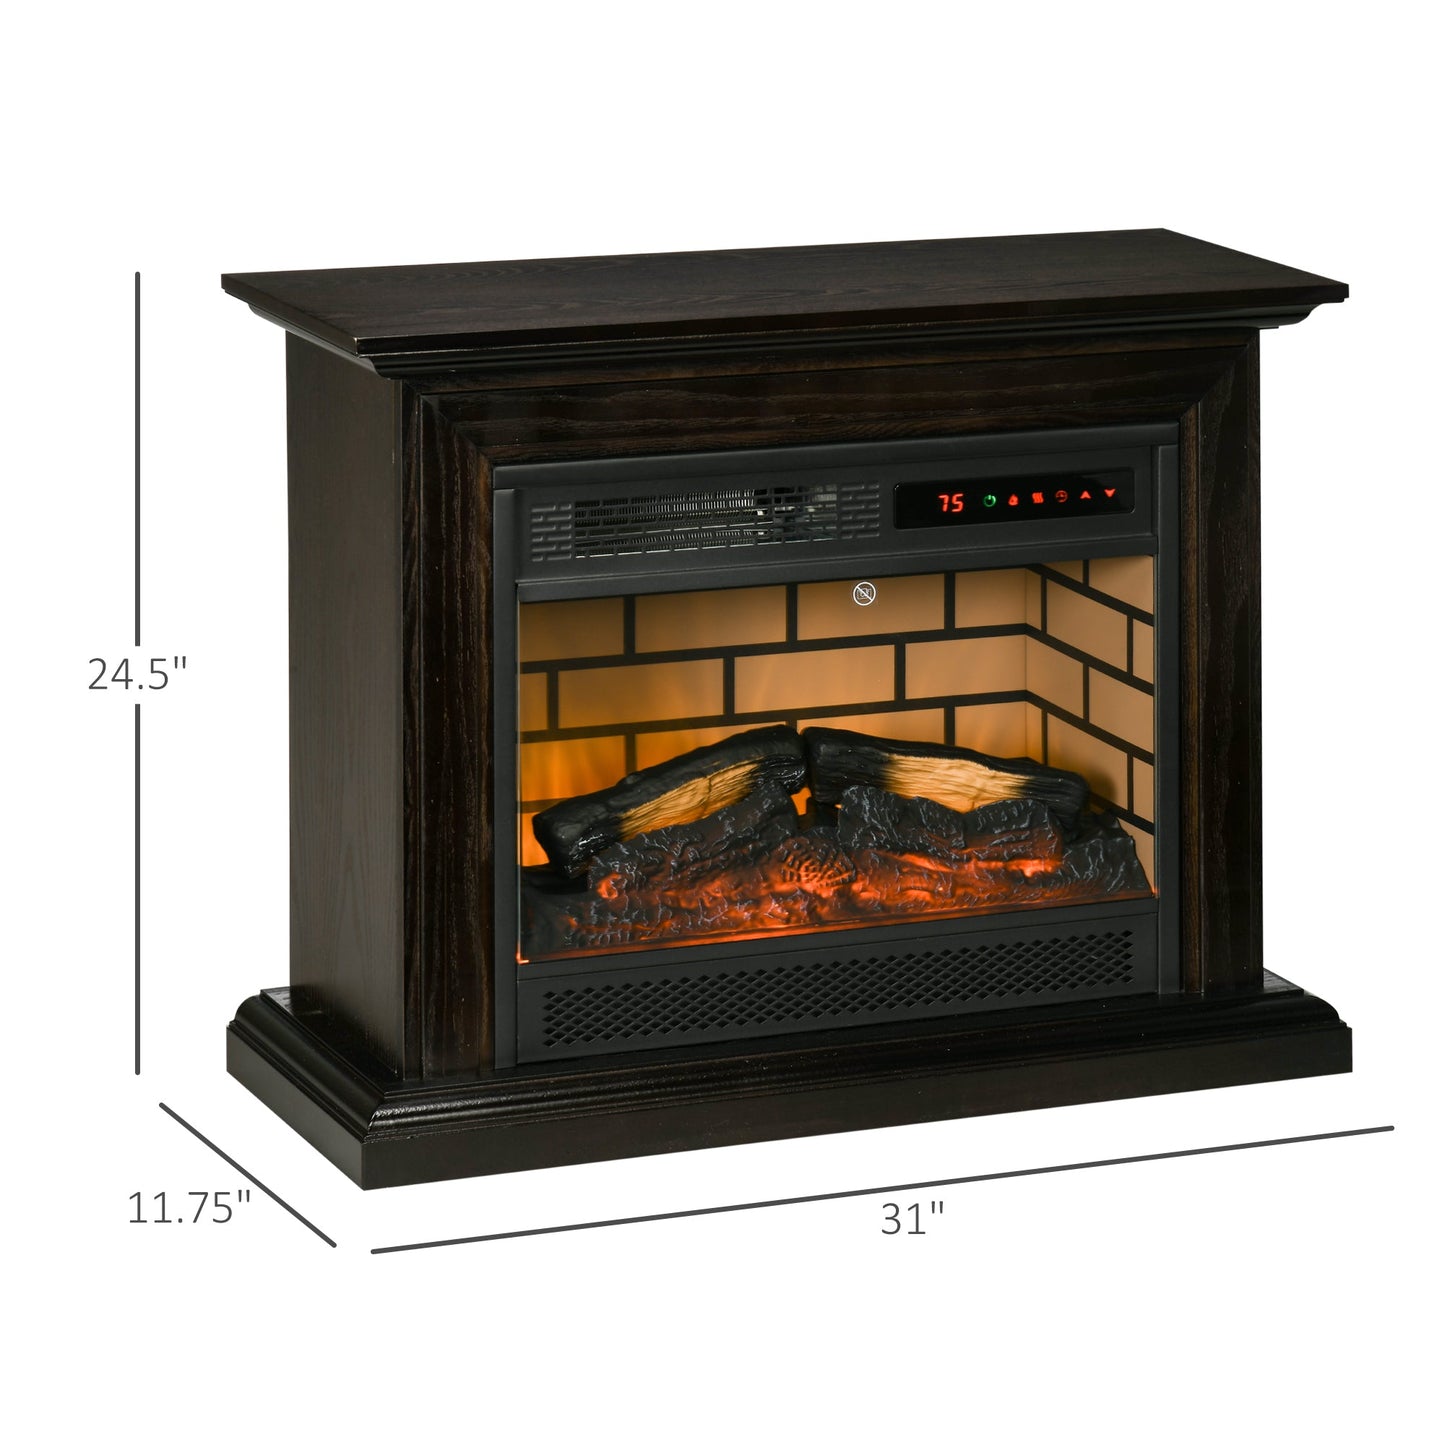 Miscellaneous-31" Electric Fireplace with Dimmable Flame Effect and Mantel, Free Standing Electric Fireplace with Log Hearth and Remote Control, 1400W, Brown - Outdoor Style Company